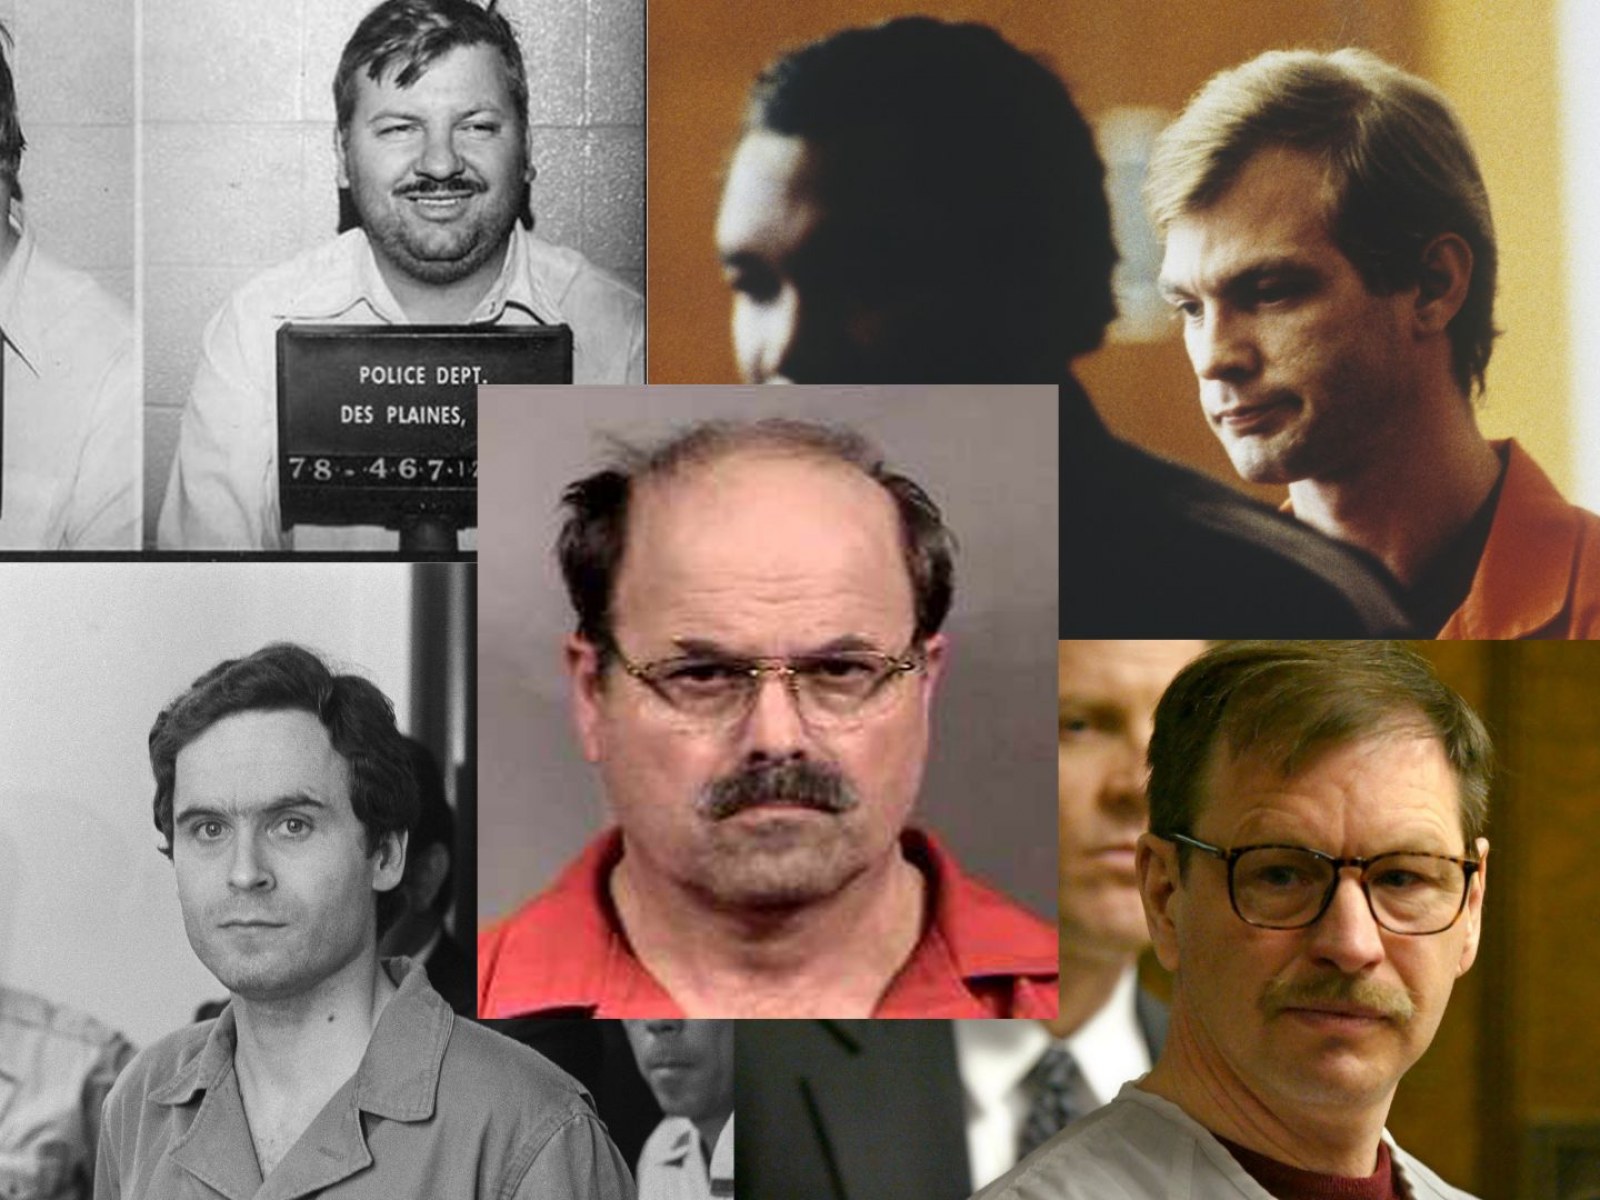 Who is the most recognized serial killer?